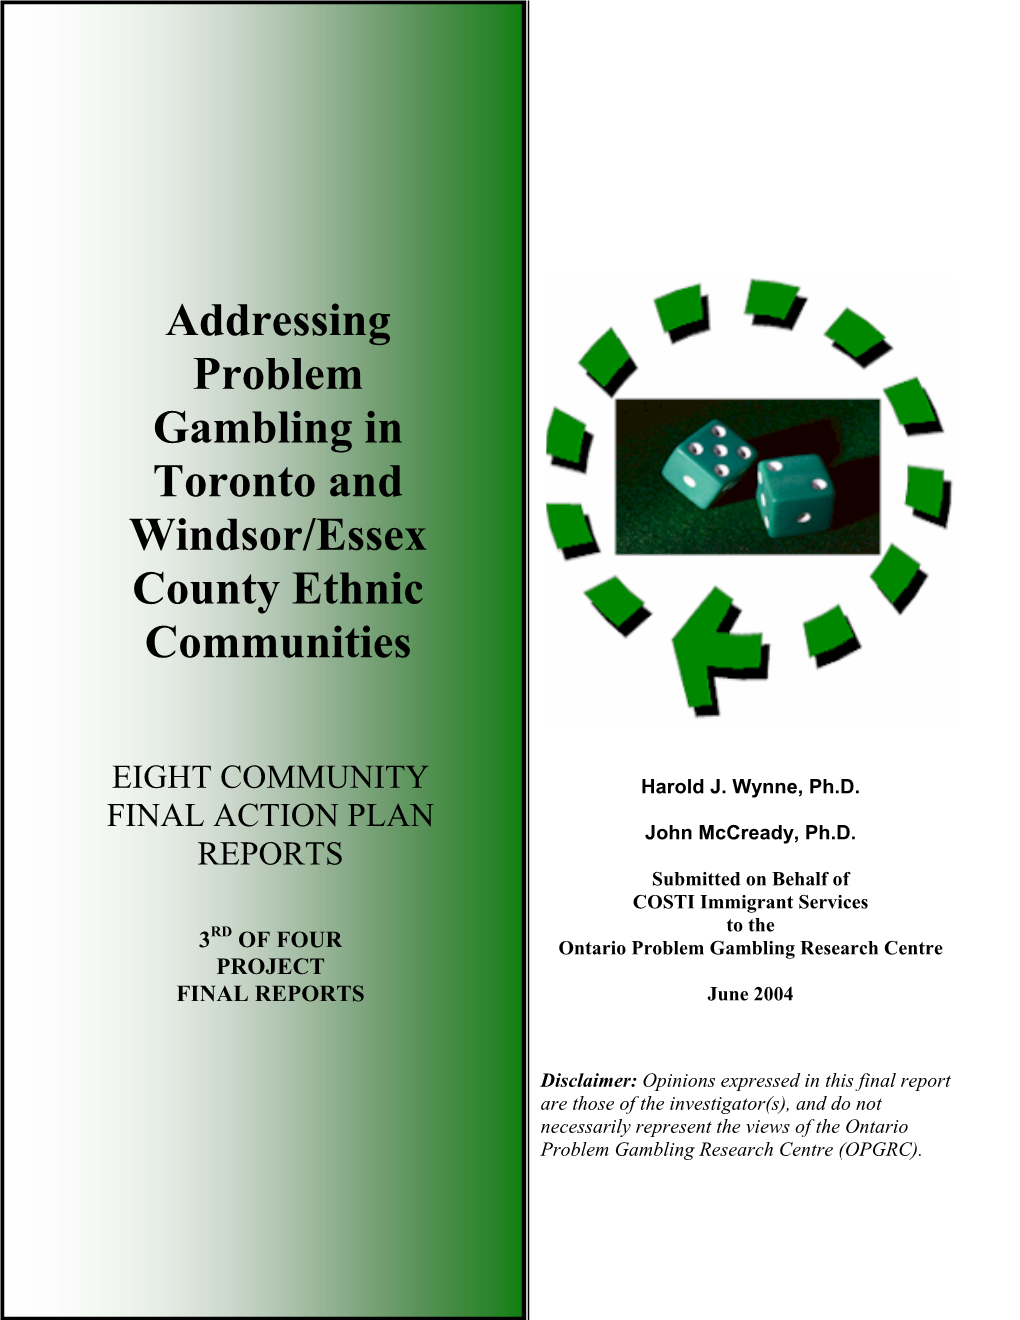 Addressing Problem Gambling in Toronto and Windsor/Essex County Ethnic Communities